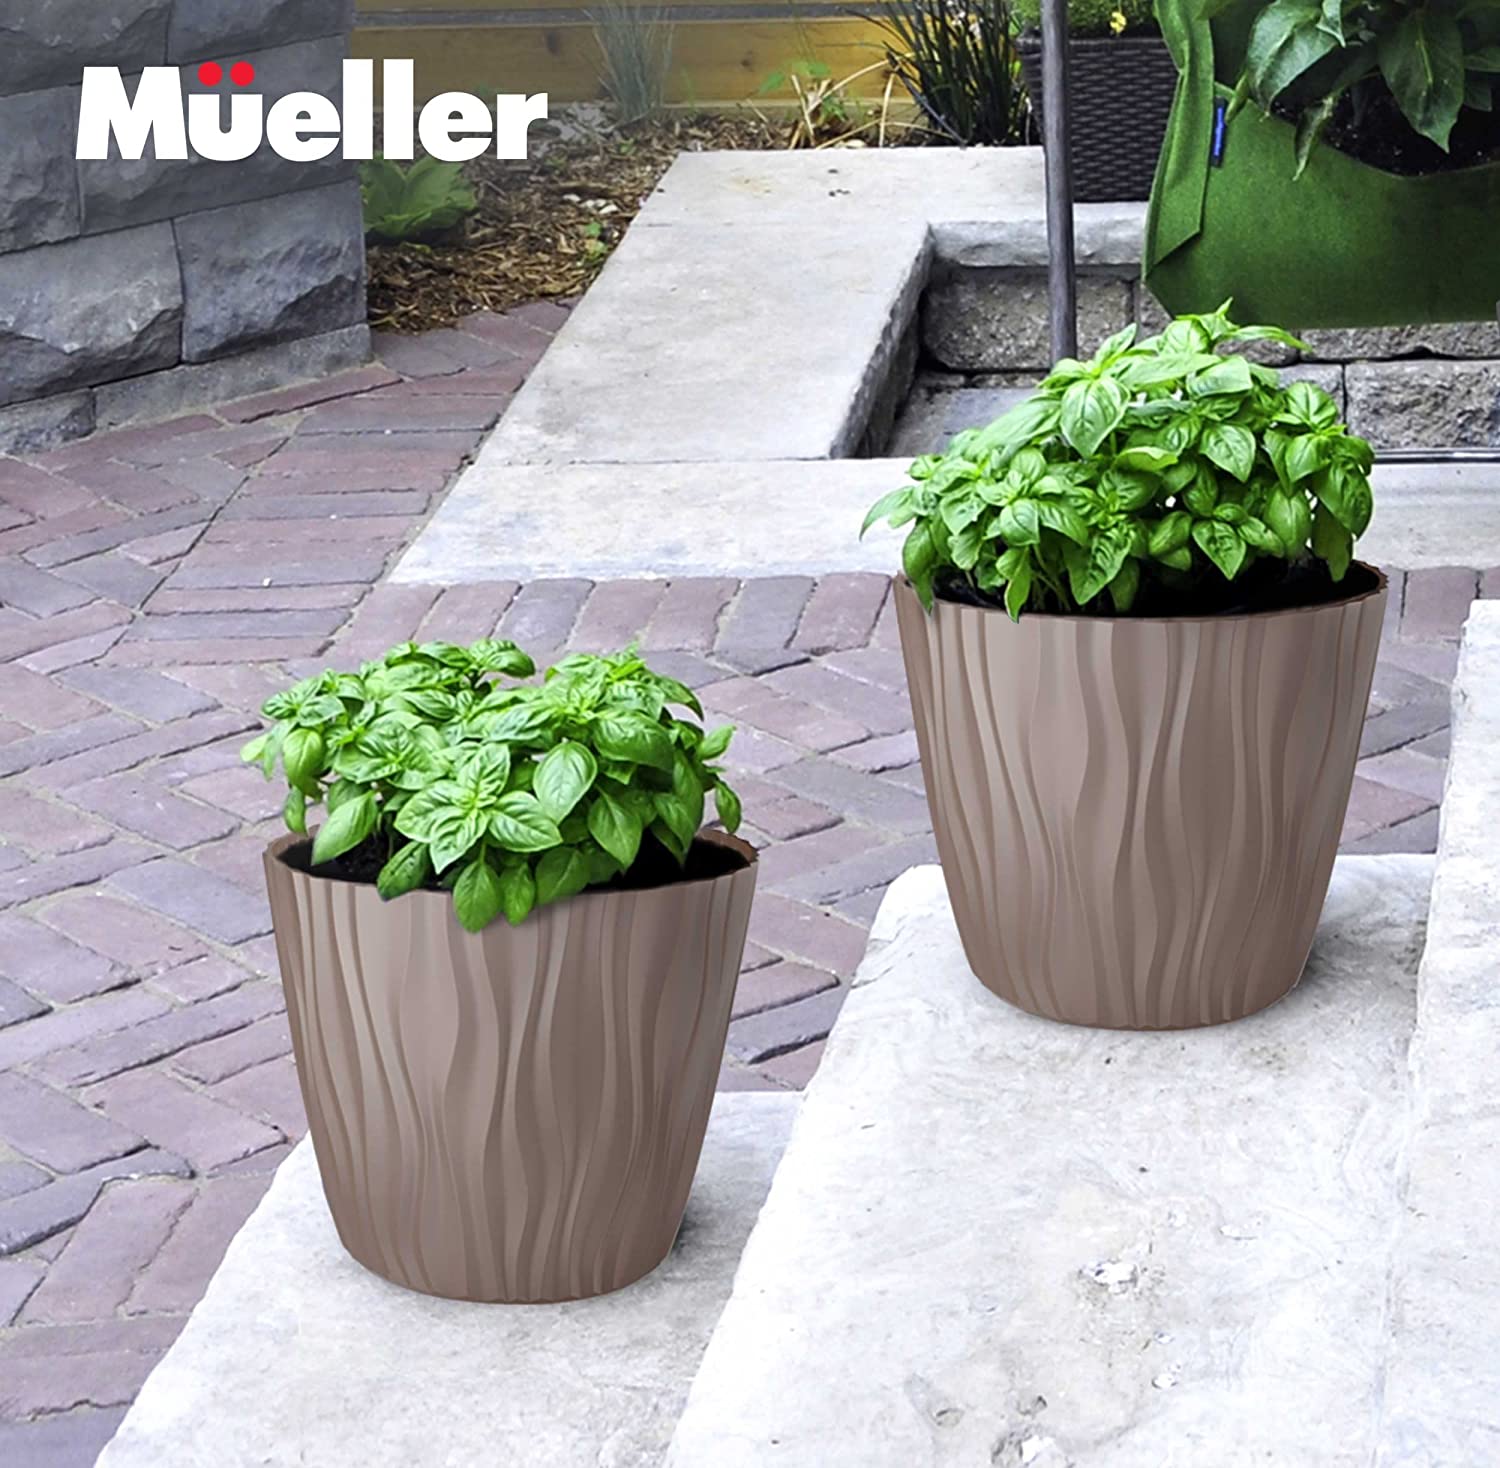 muellerhome_Decorative-Plant-and-Flower-Pots-Small-2-Piece-Mocca-Set-7